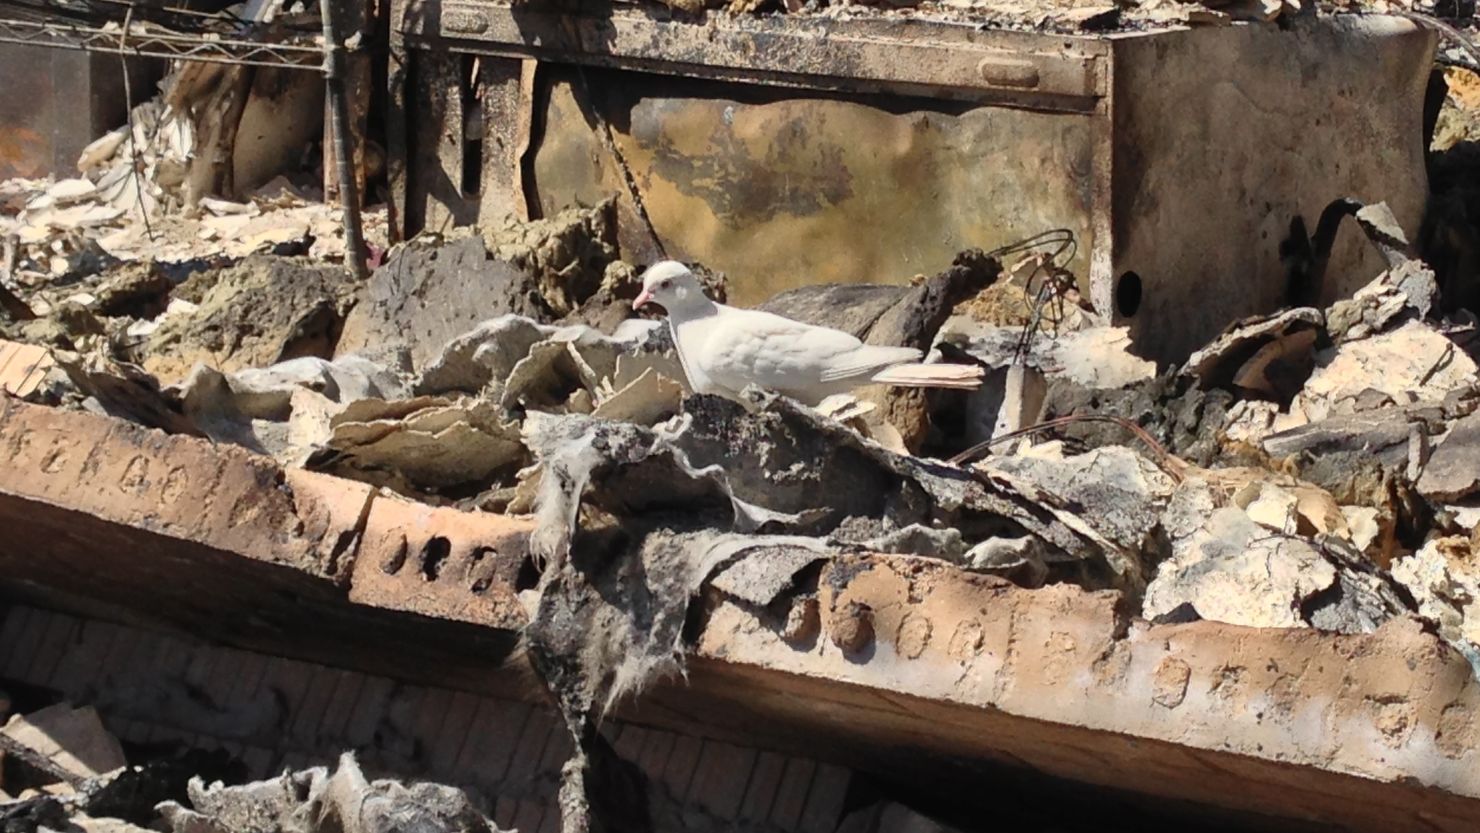 A white dove sits amid the ruins of a home destroyed by the April 17 blast at the West Fertilizer Co. in West, Texas.